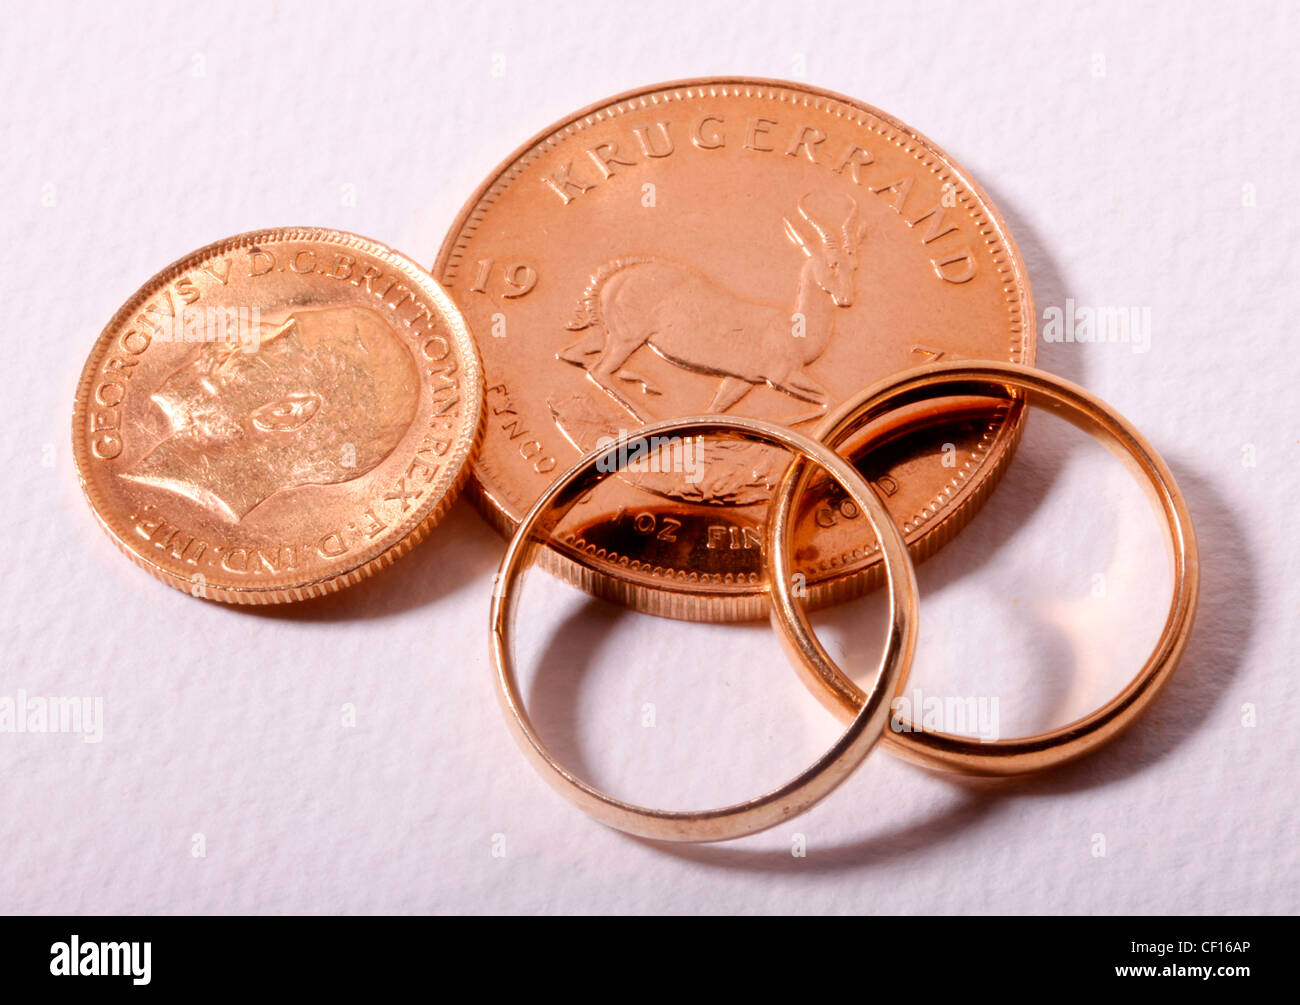 GOLD KRUGERRAND, GOLD SOVEREIGN COINS AND WEDDING RINGS Stock Photo